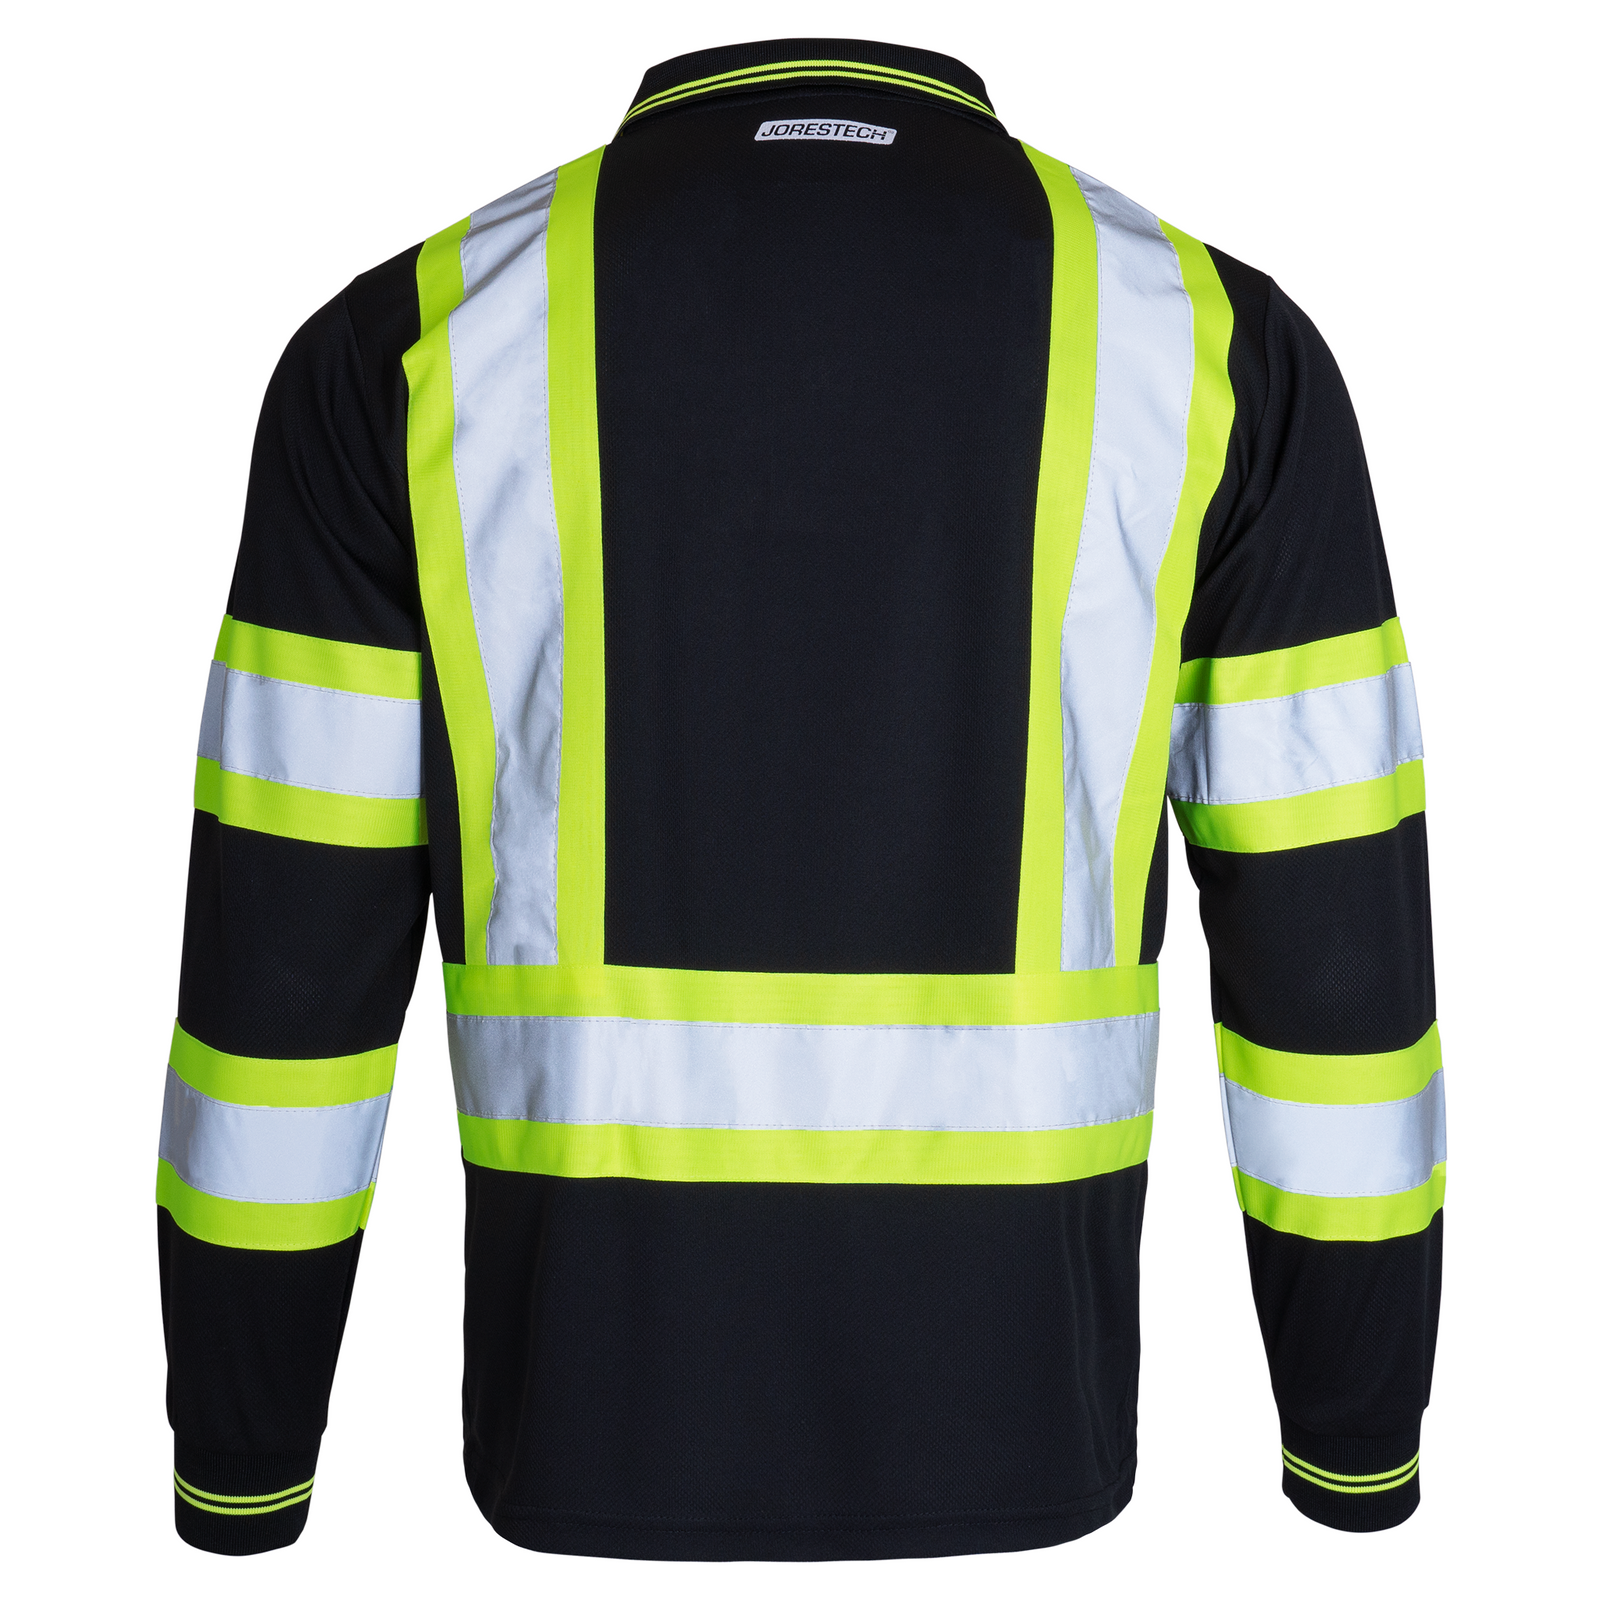 Hi Vis reflective safety long sleeve ANSI compliant type O class 1 black and yellow polo shirt